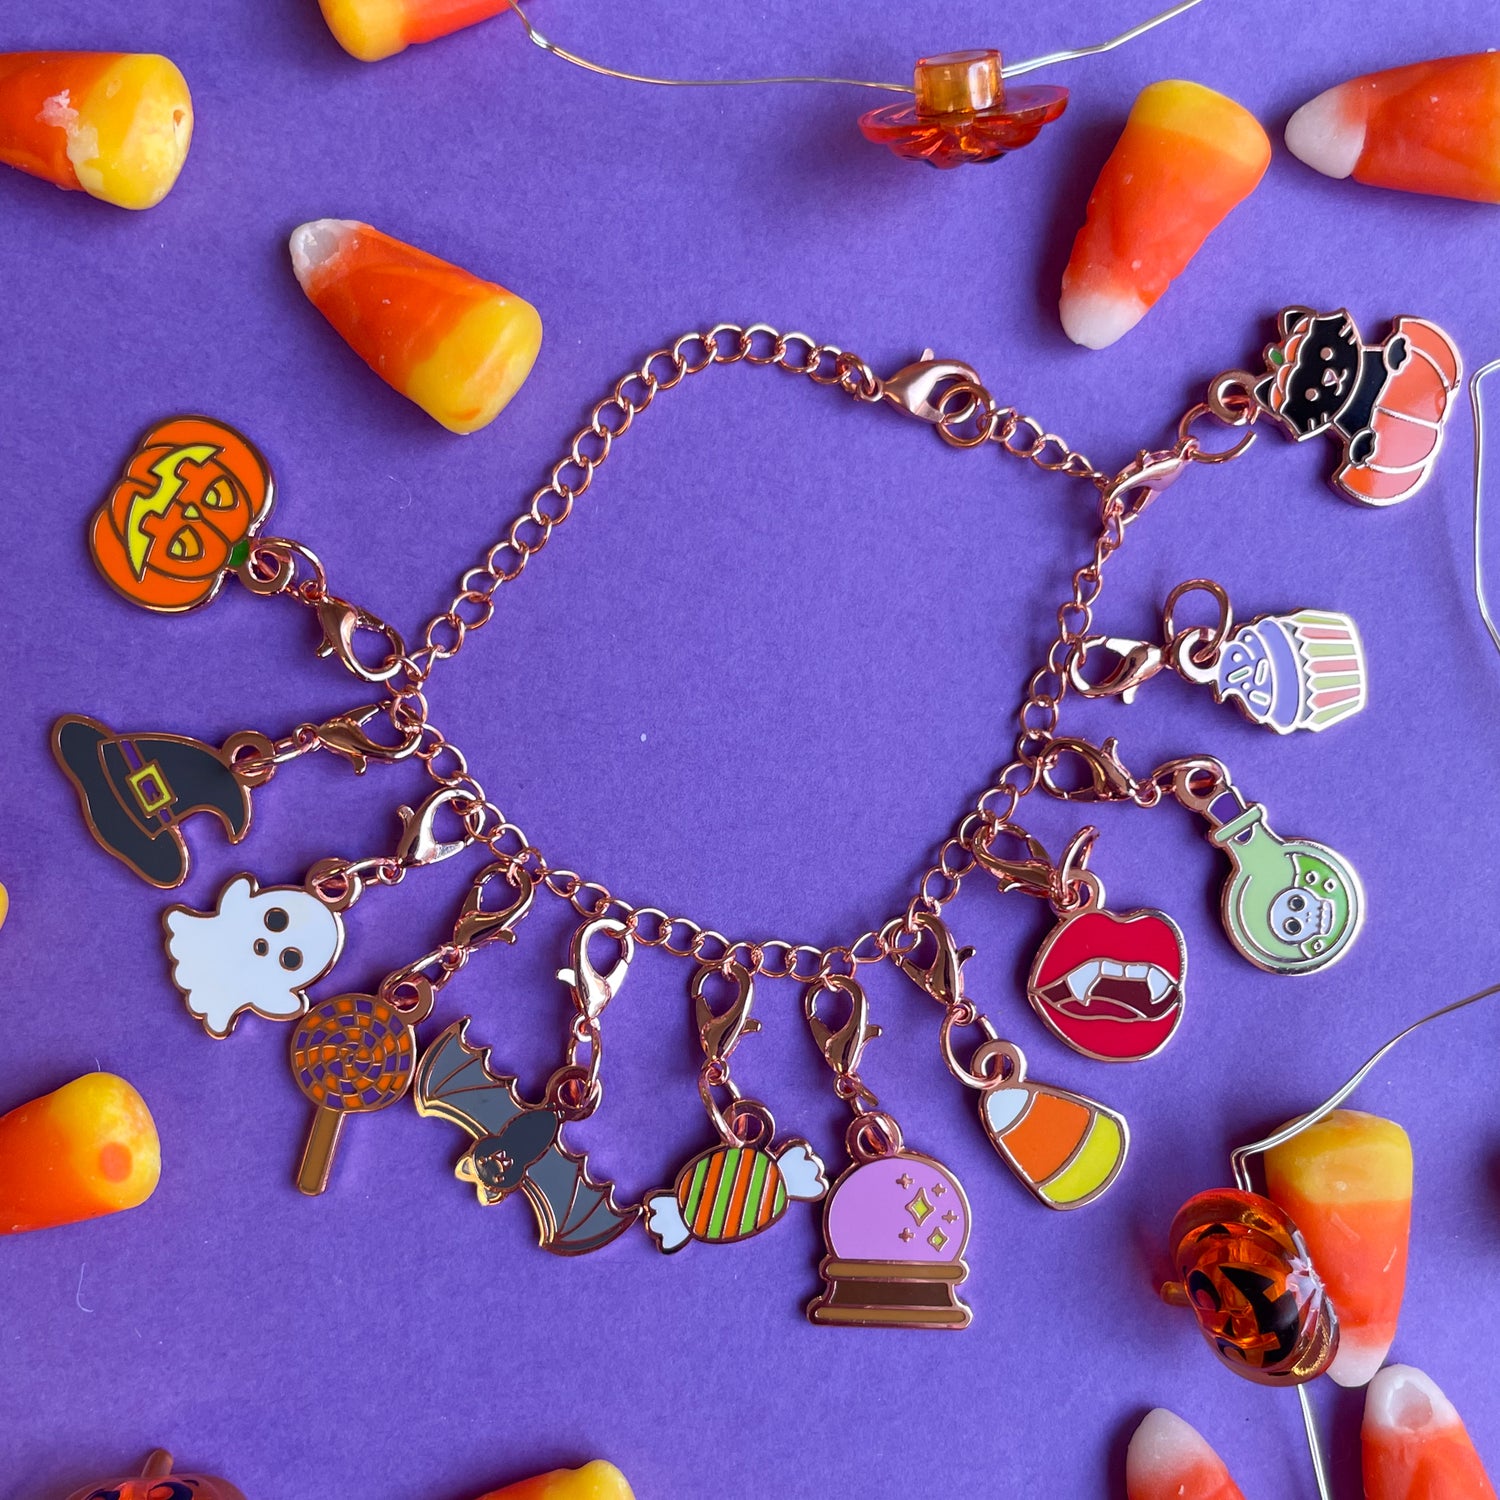 A rose gold colored charm bracelet with 12 lobster claw clasp charms shaped like various halloween items.